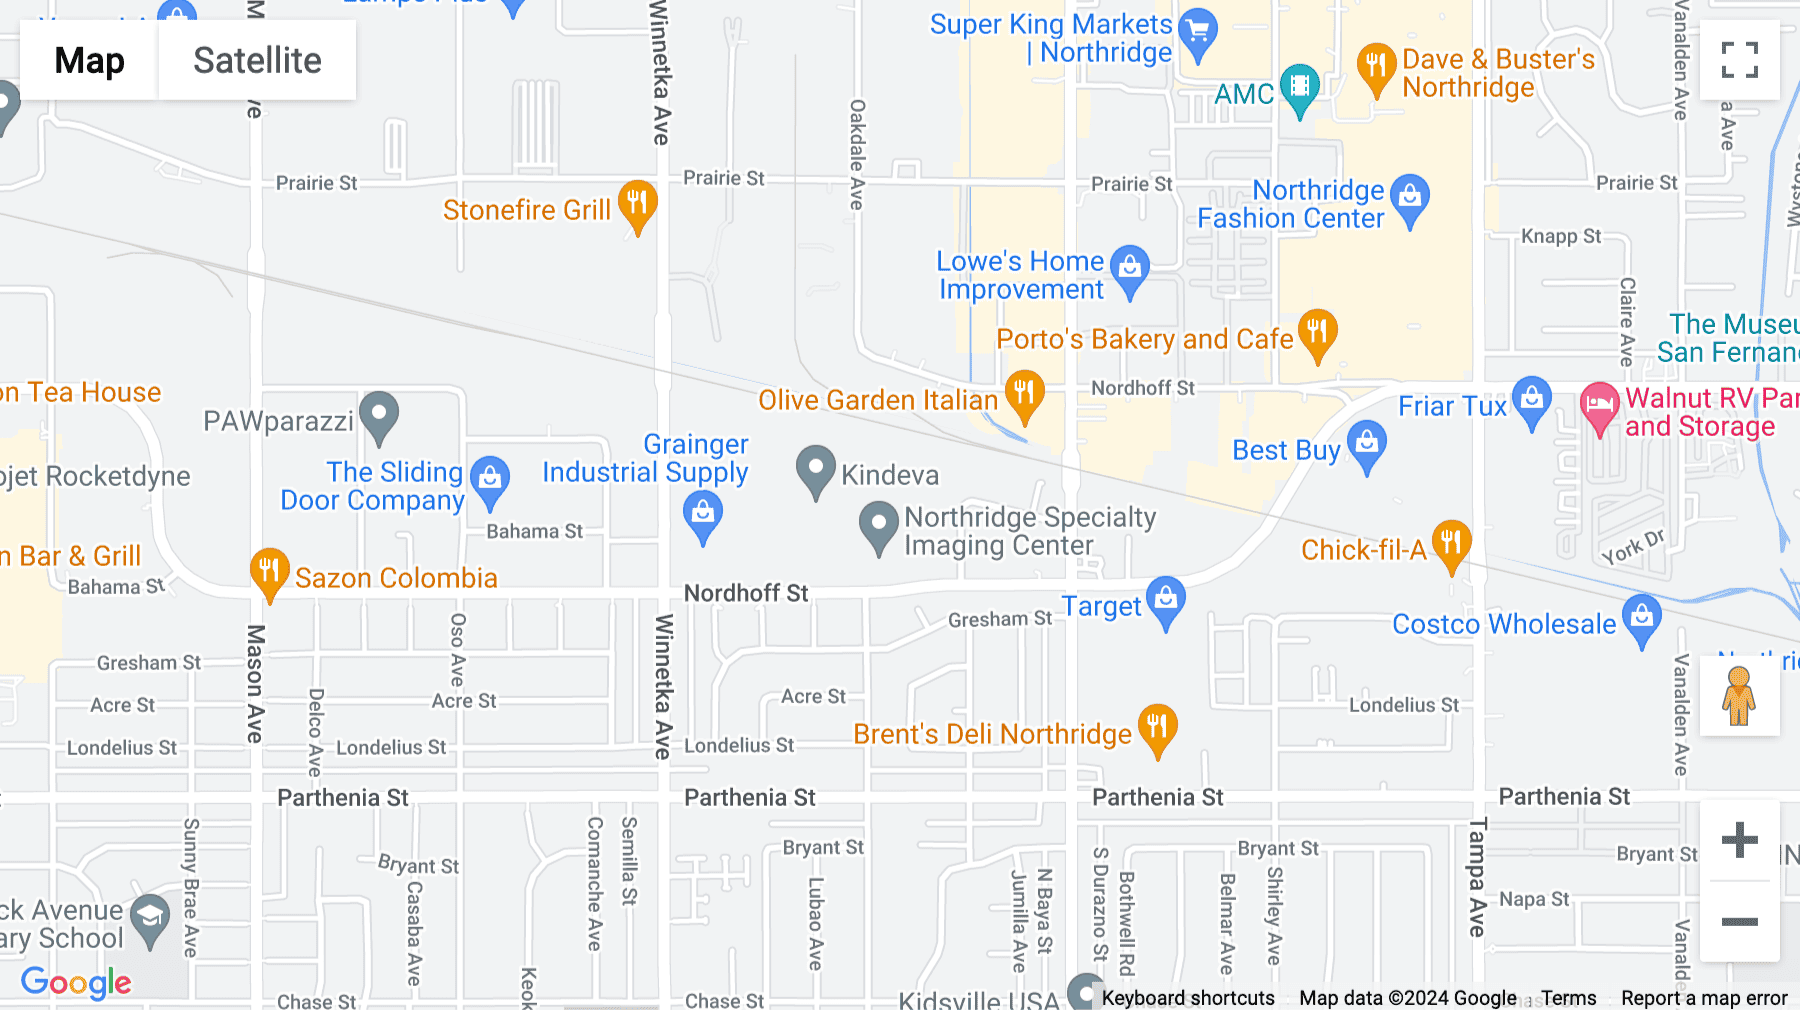 Click for interative map of 19849 Nordhoff Street, Los Angeles